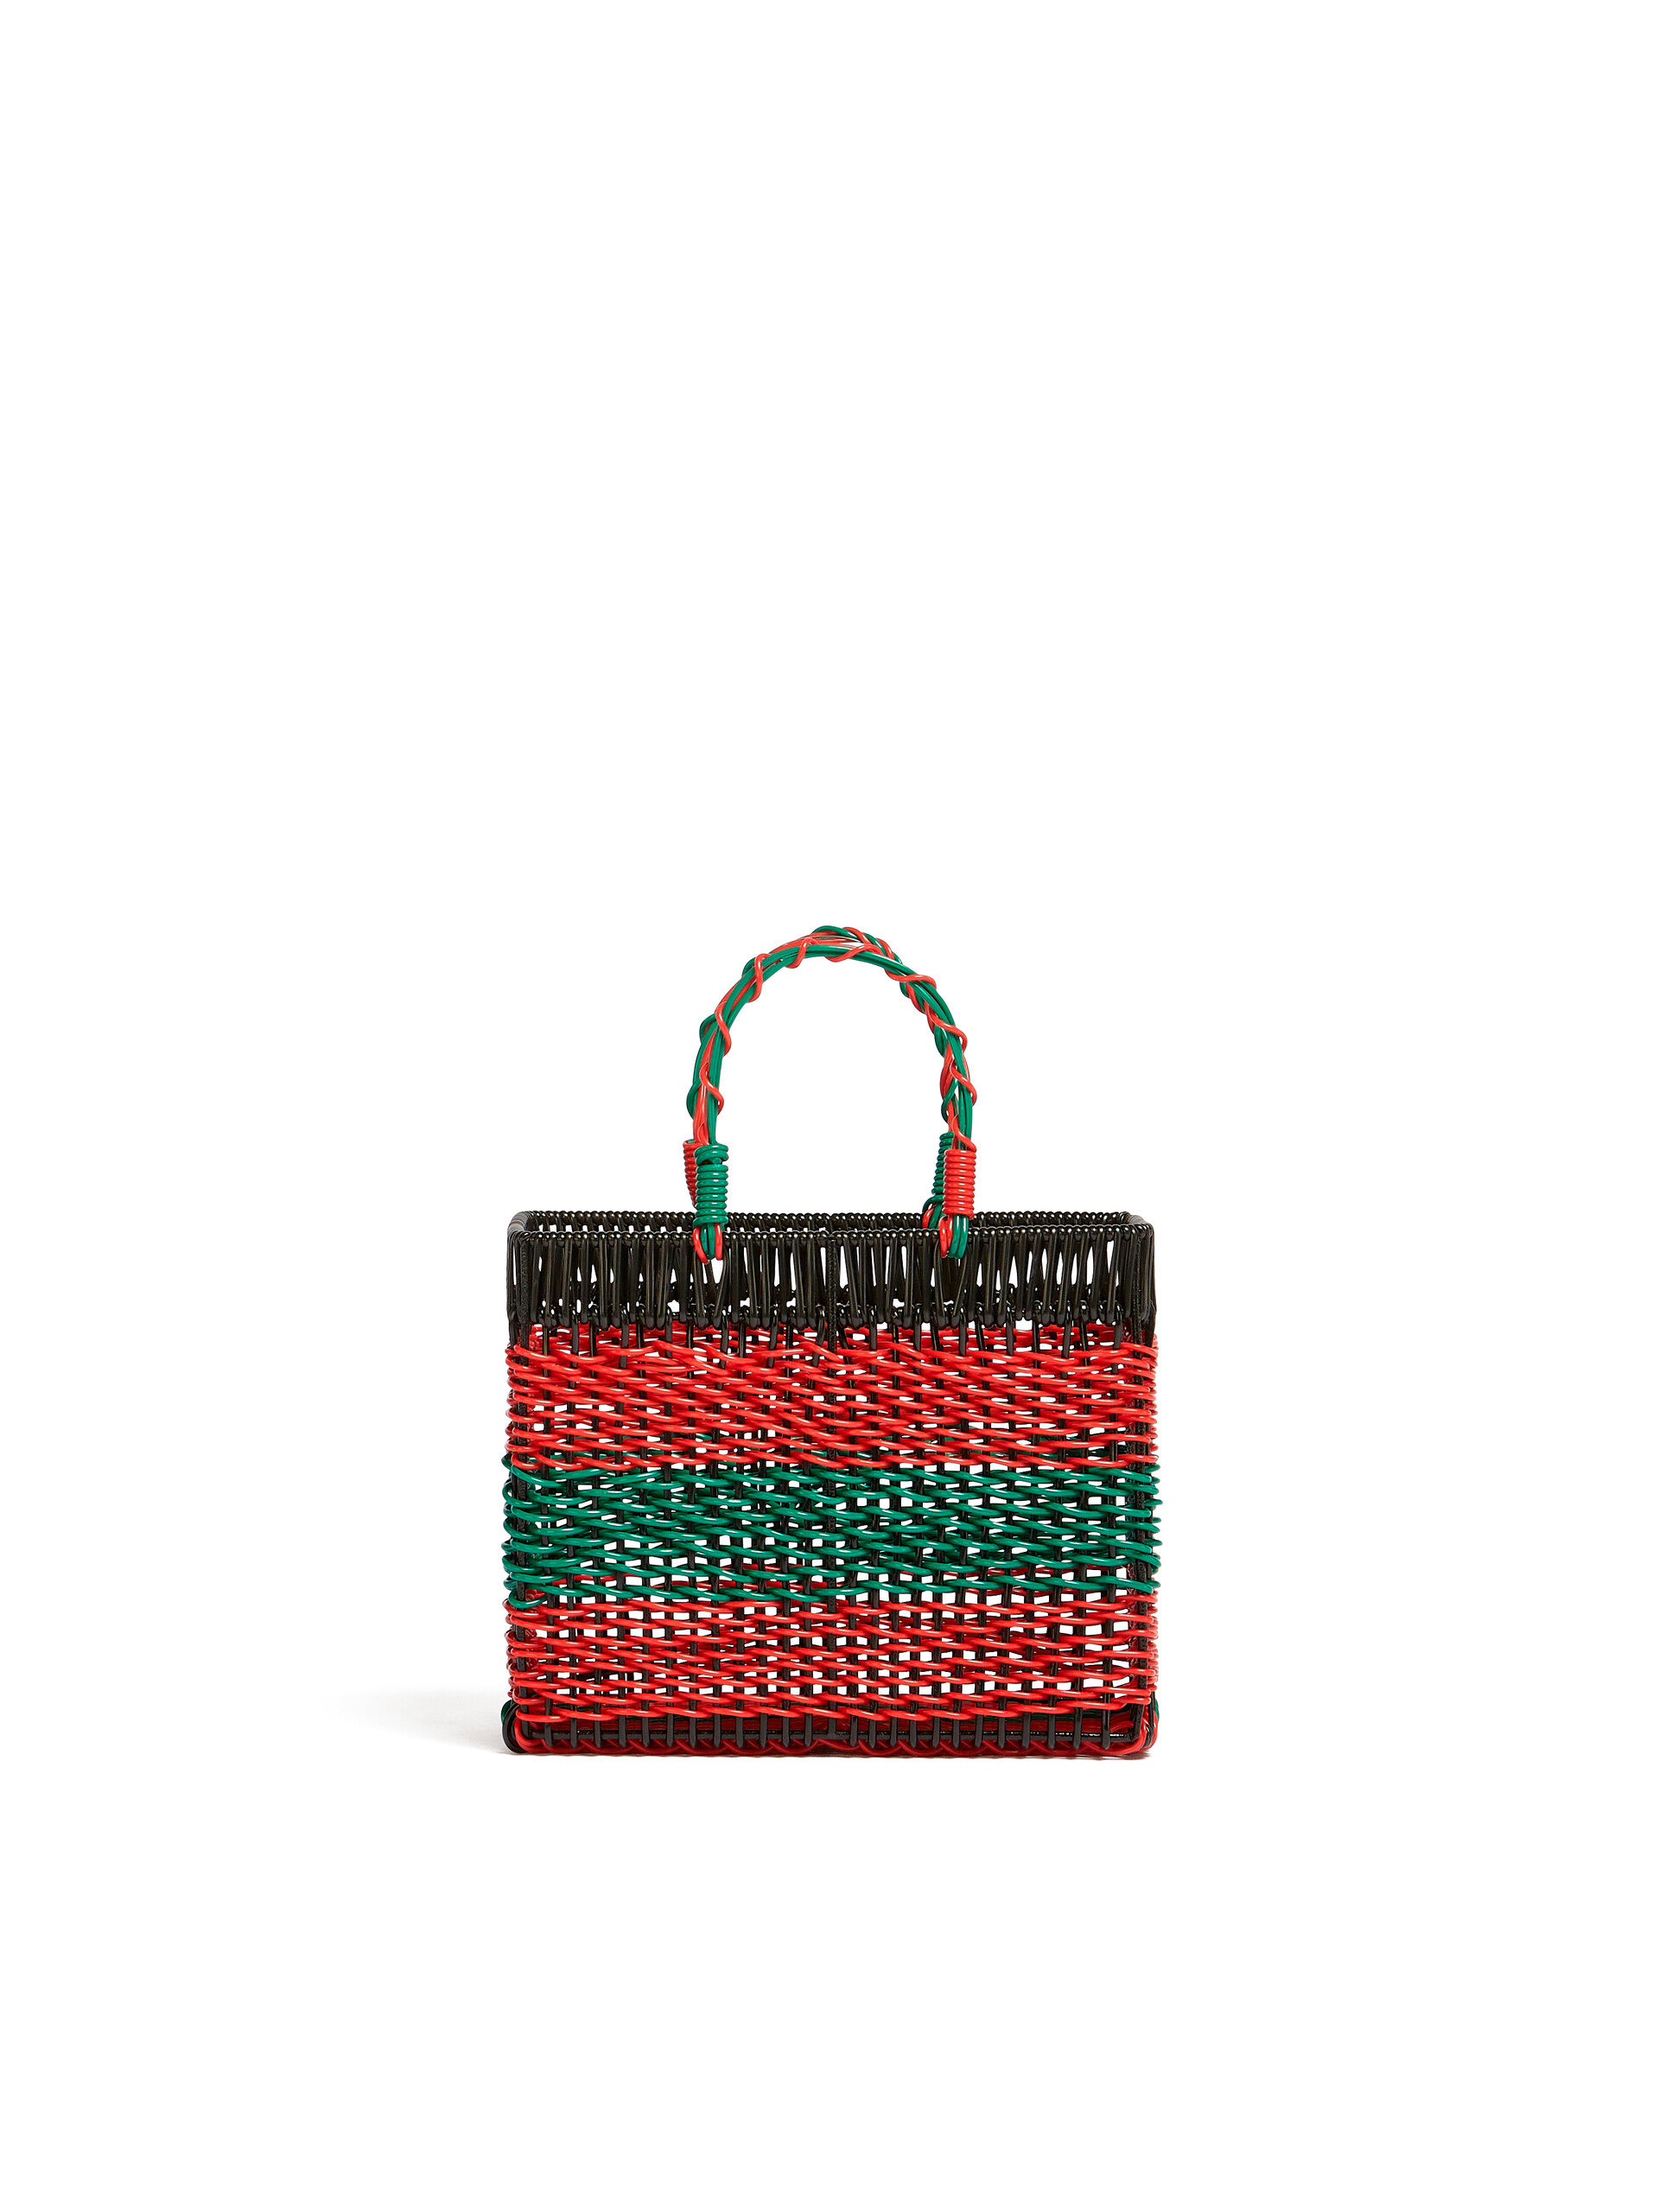 MARNI MARKET basket in iron and green and red PVC - Home Accessories - Image 3